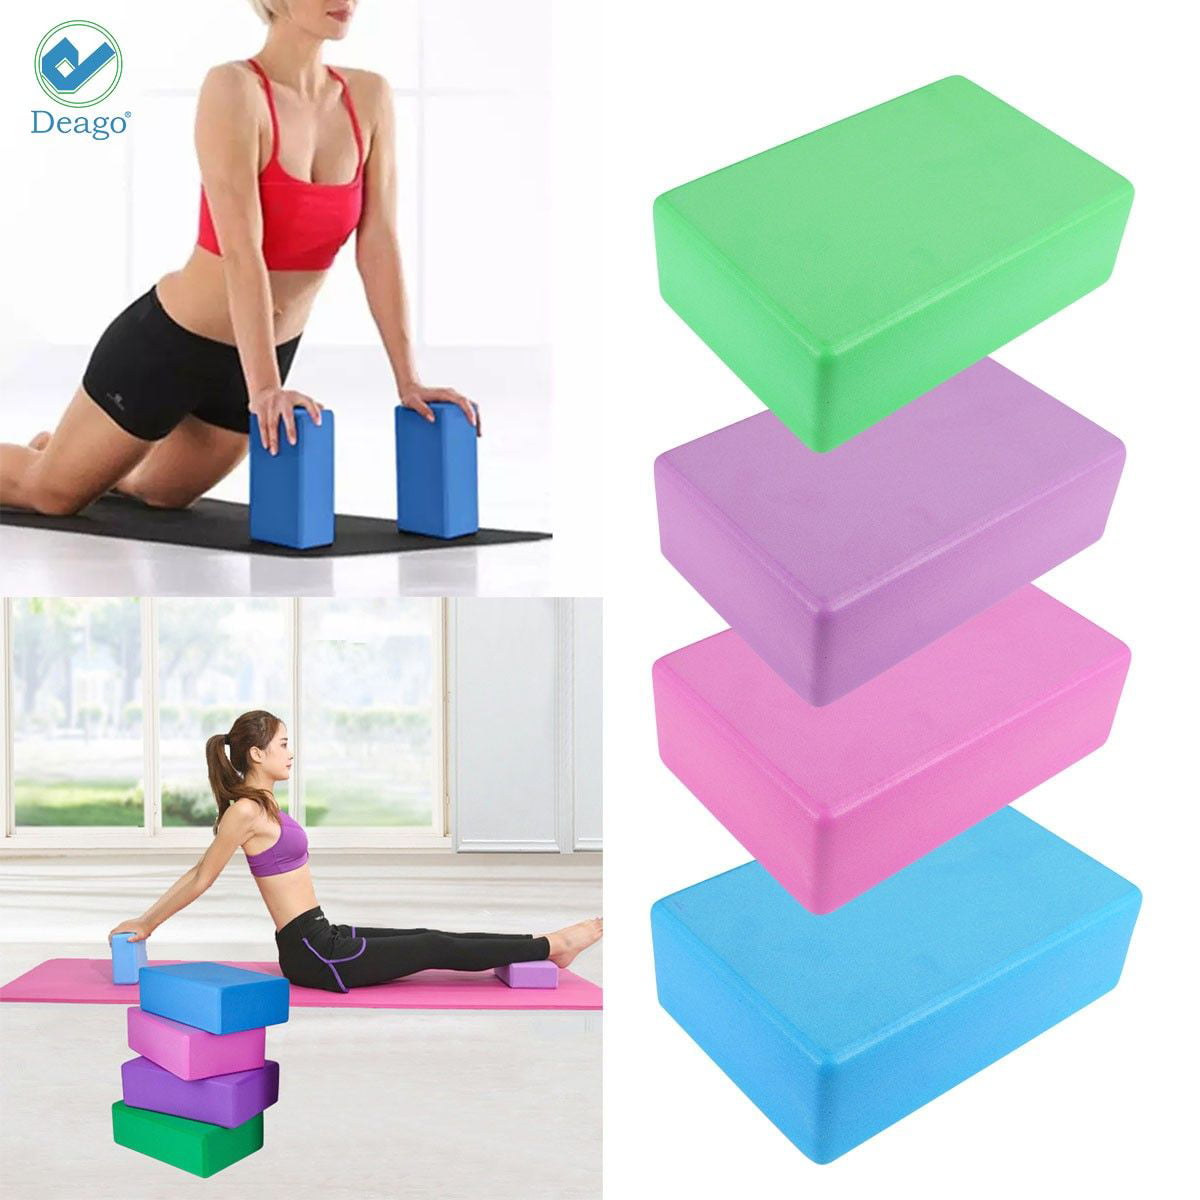 Fitness & Gym Pilates Exercise EVA Foam Soft Non-Slip Surface for Yoga Workout XPELKYS Yoga Block High Density EVA Foam Block to Support and Improve Poses and Flexibility Meditation